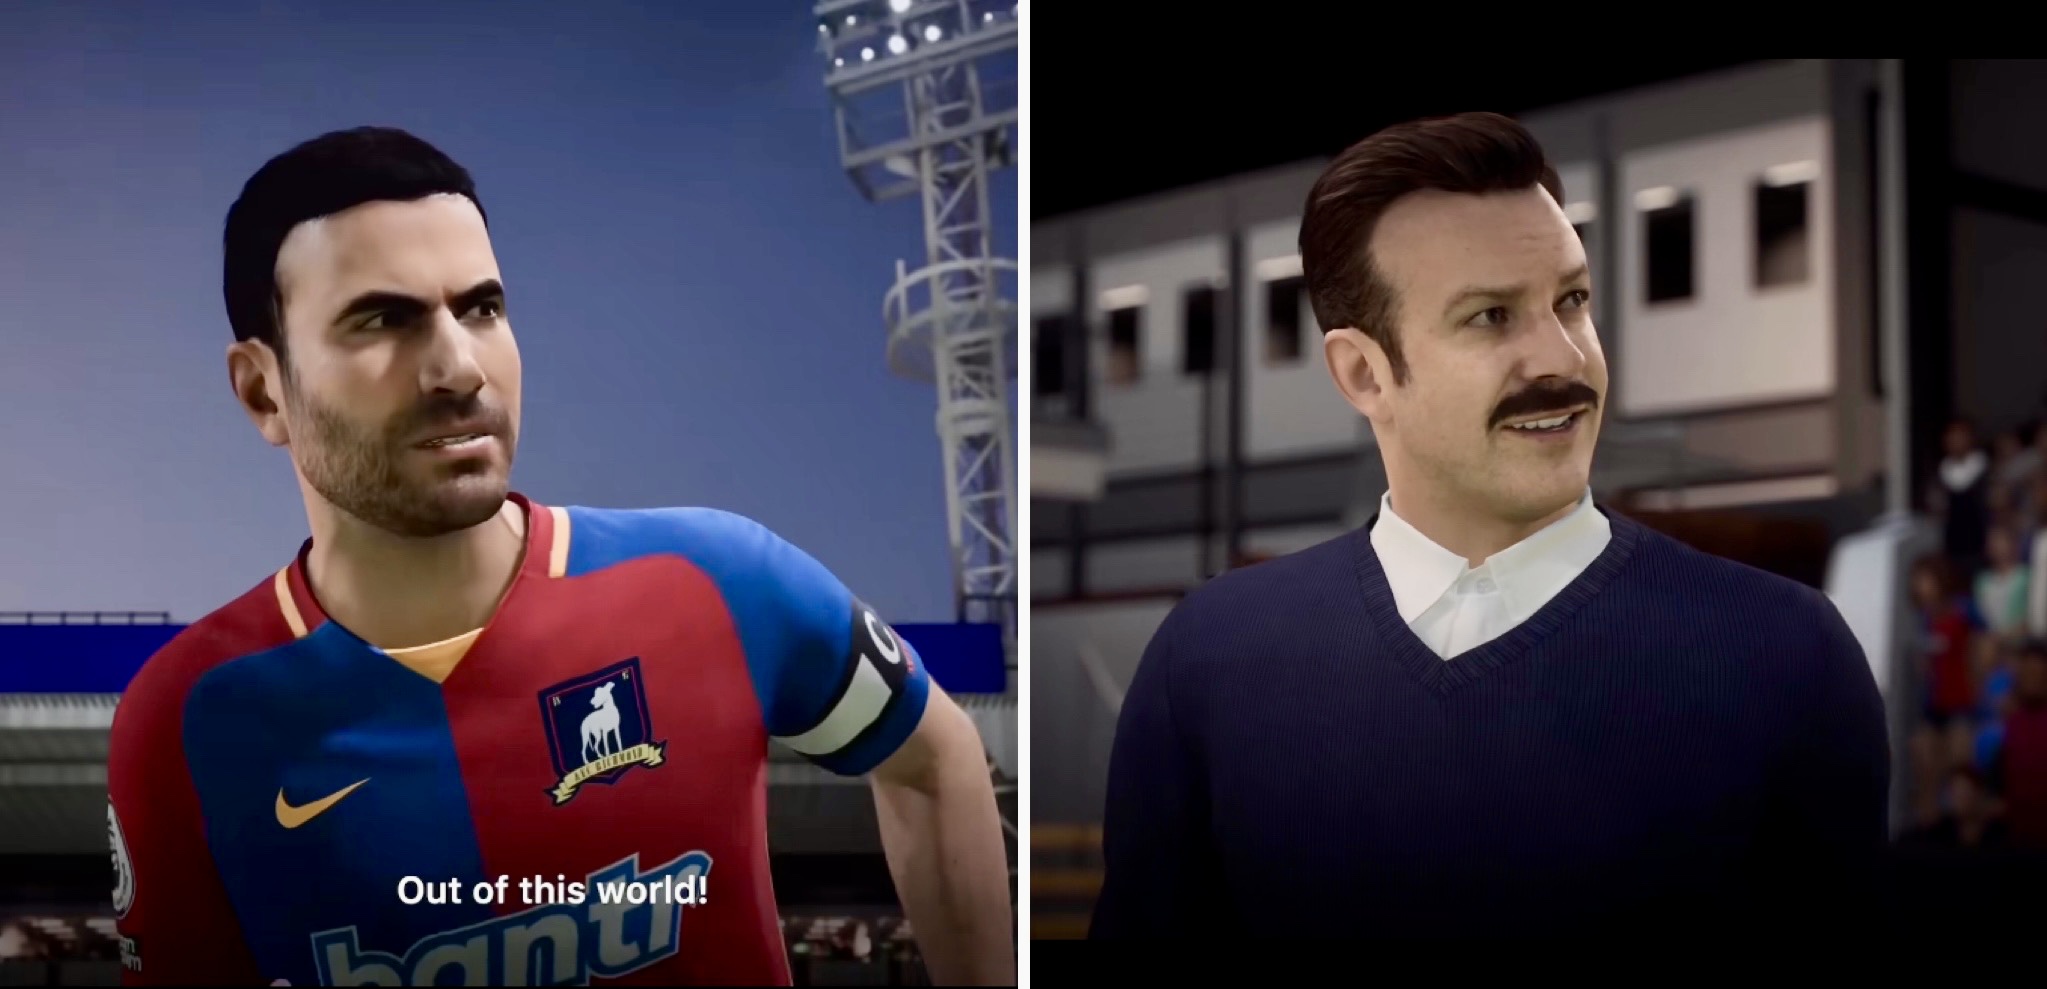 You can play as AFC Richmond from Ted Lasso in EA SPORTS FIFA 23